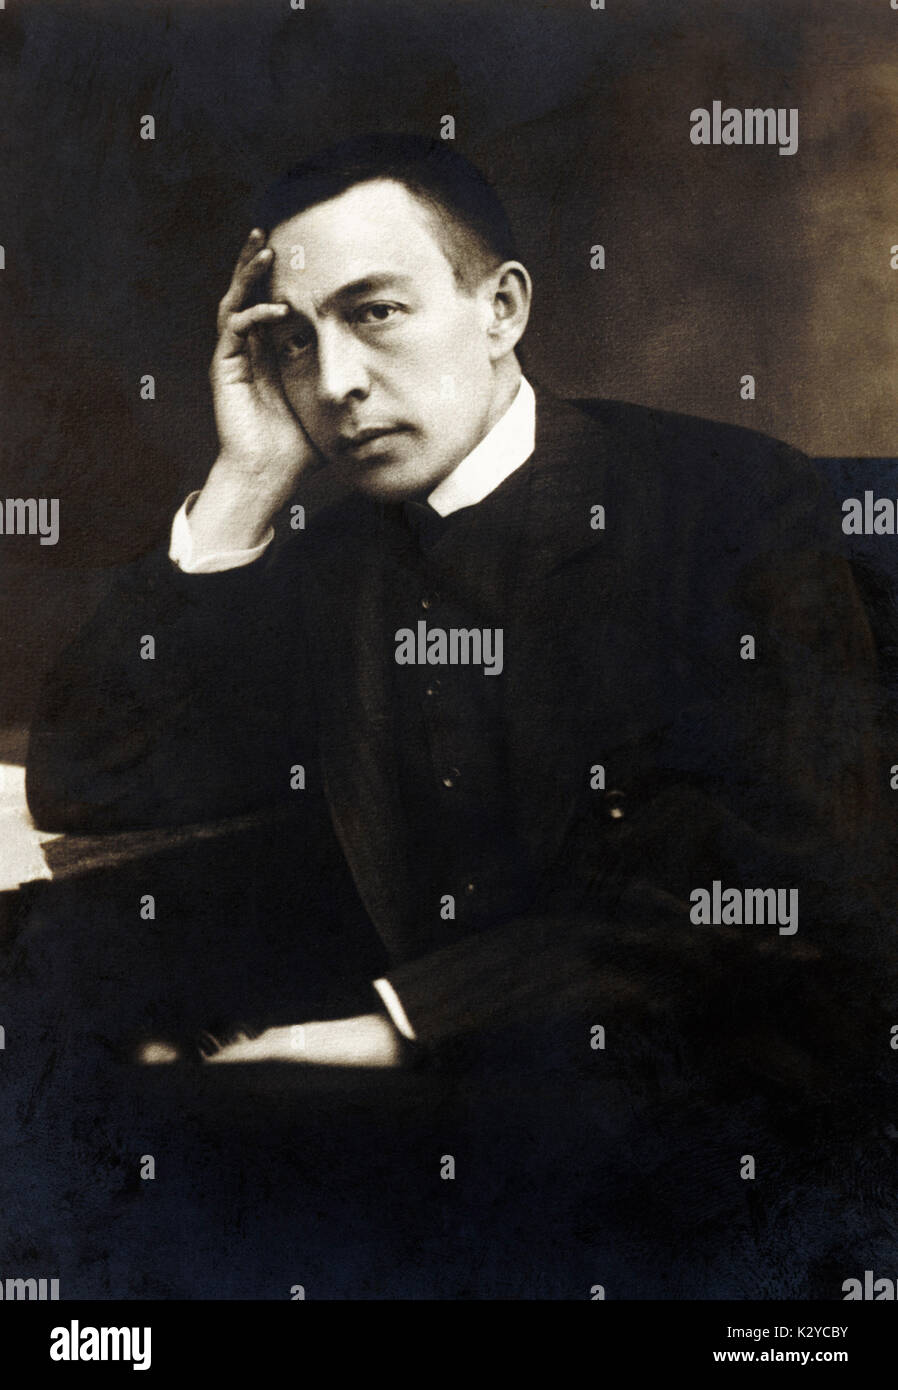 Sergei Rachmaninov - portrait.   Russian pianist and composer, 1 April 1873 - 28 March 1943.  Sergey Stock Photo